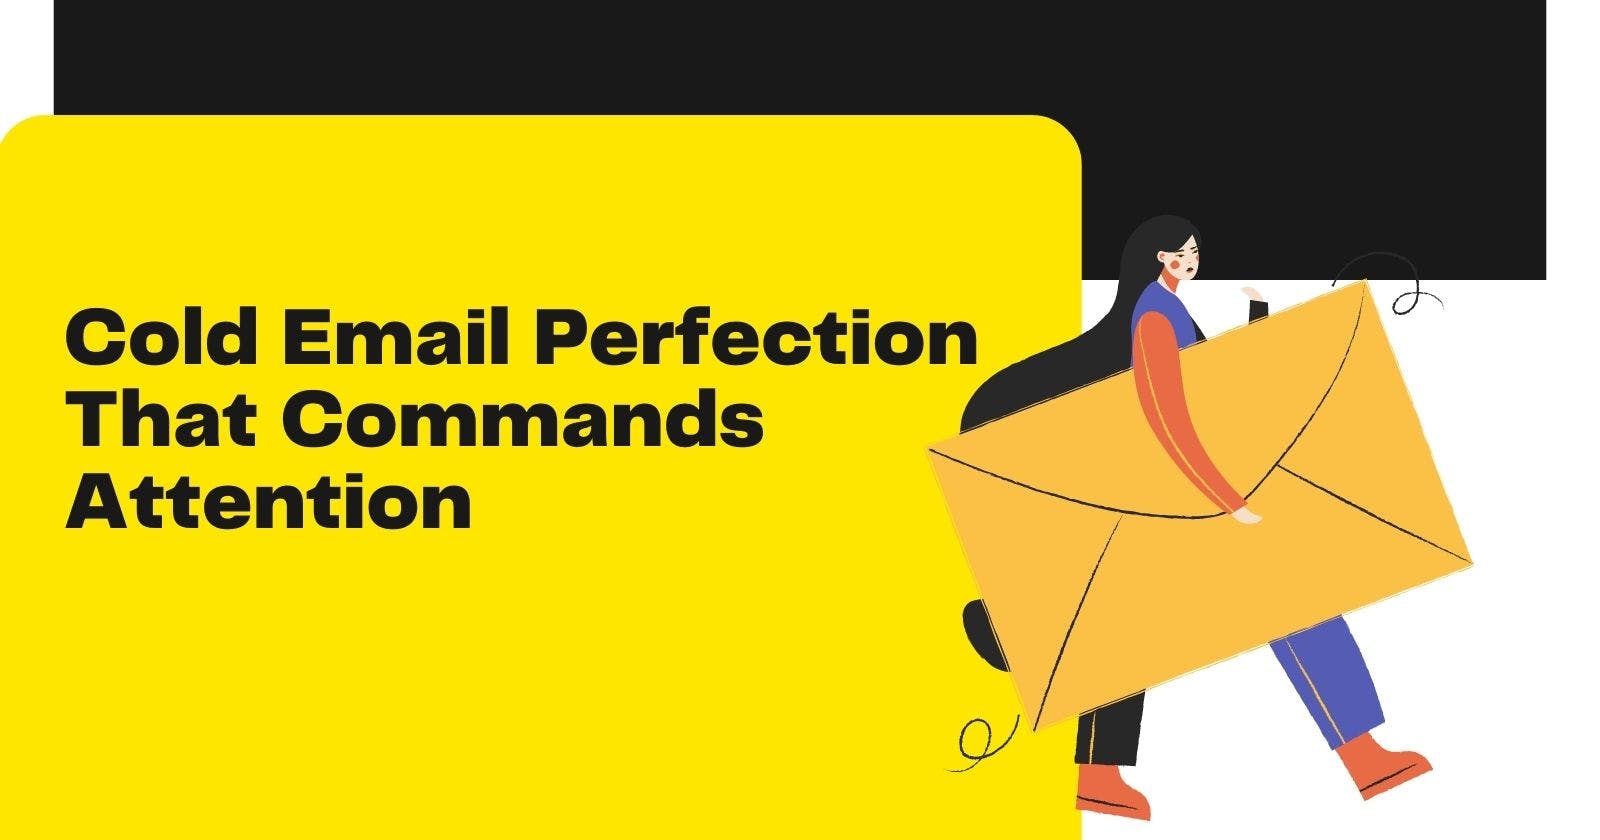 Cold Email Perfection That Commands Attention